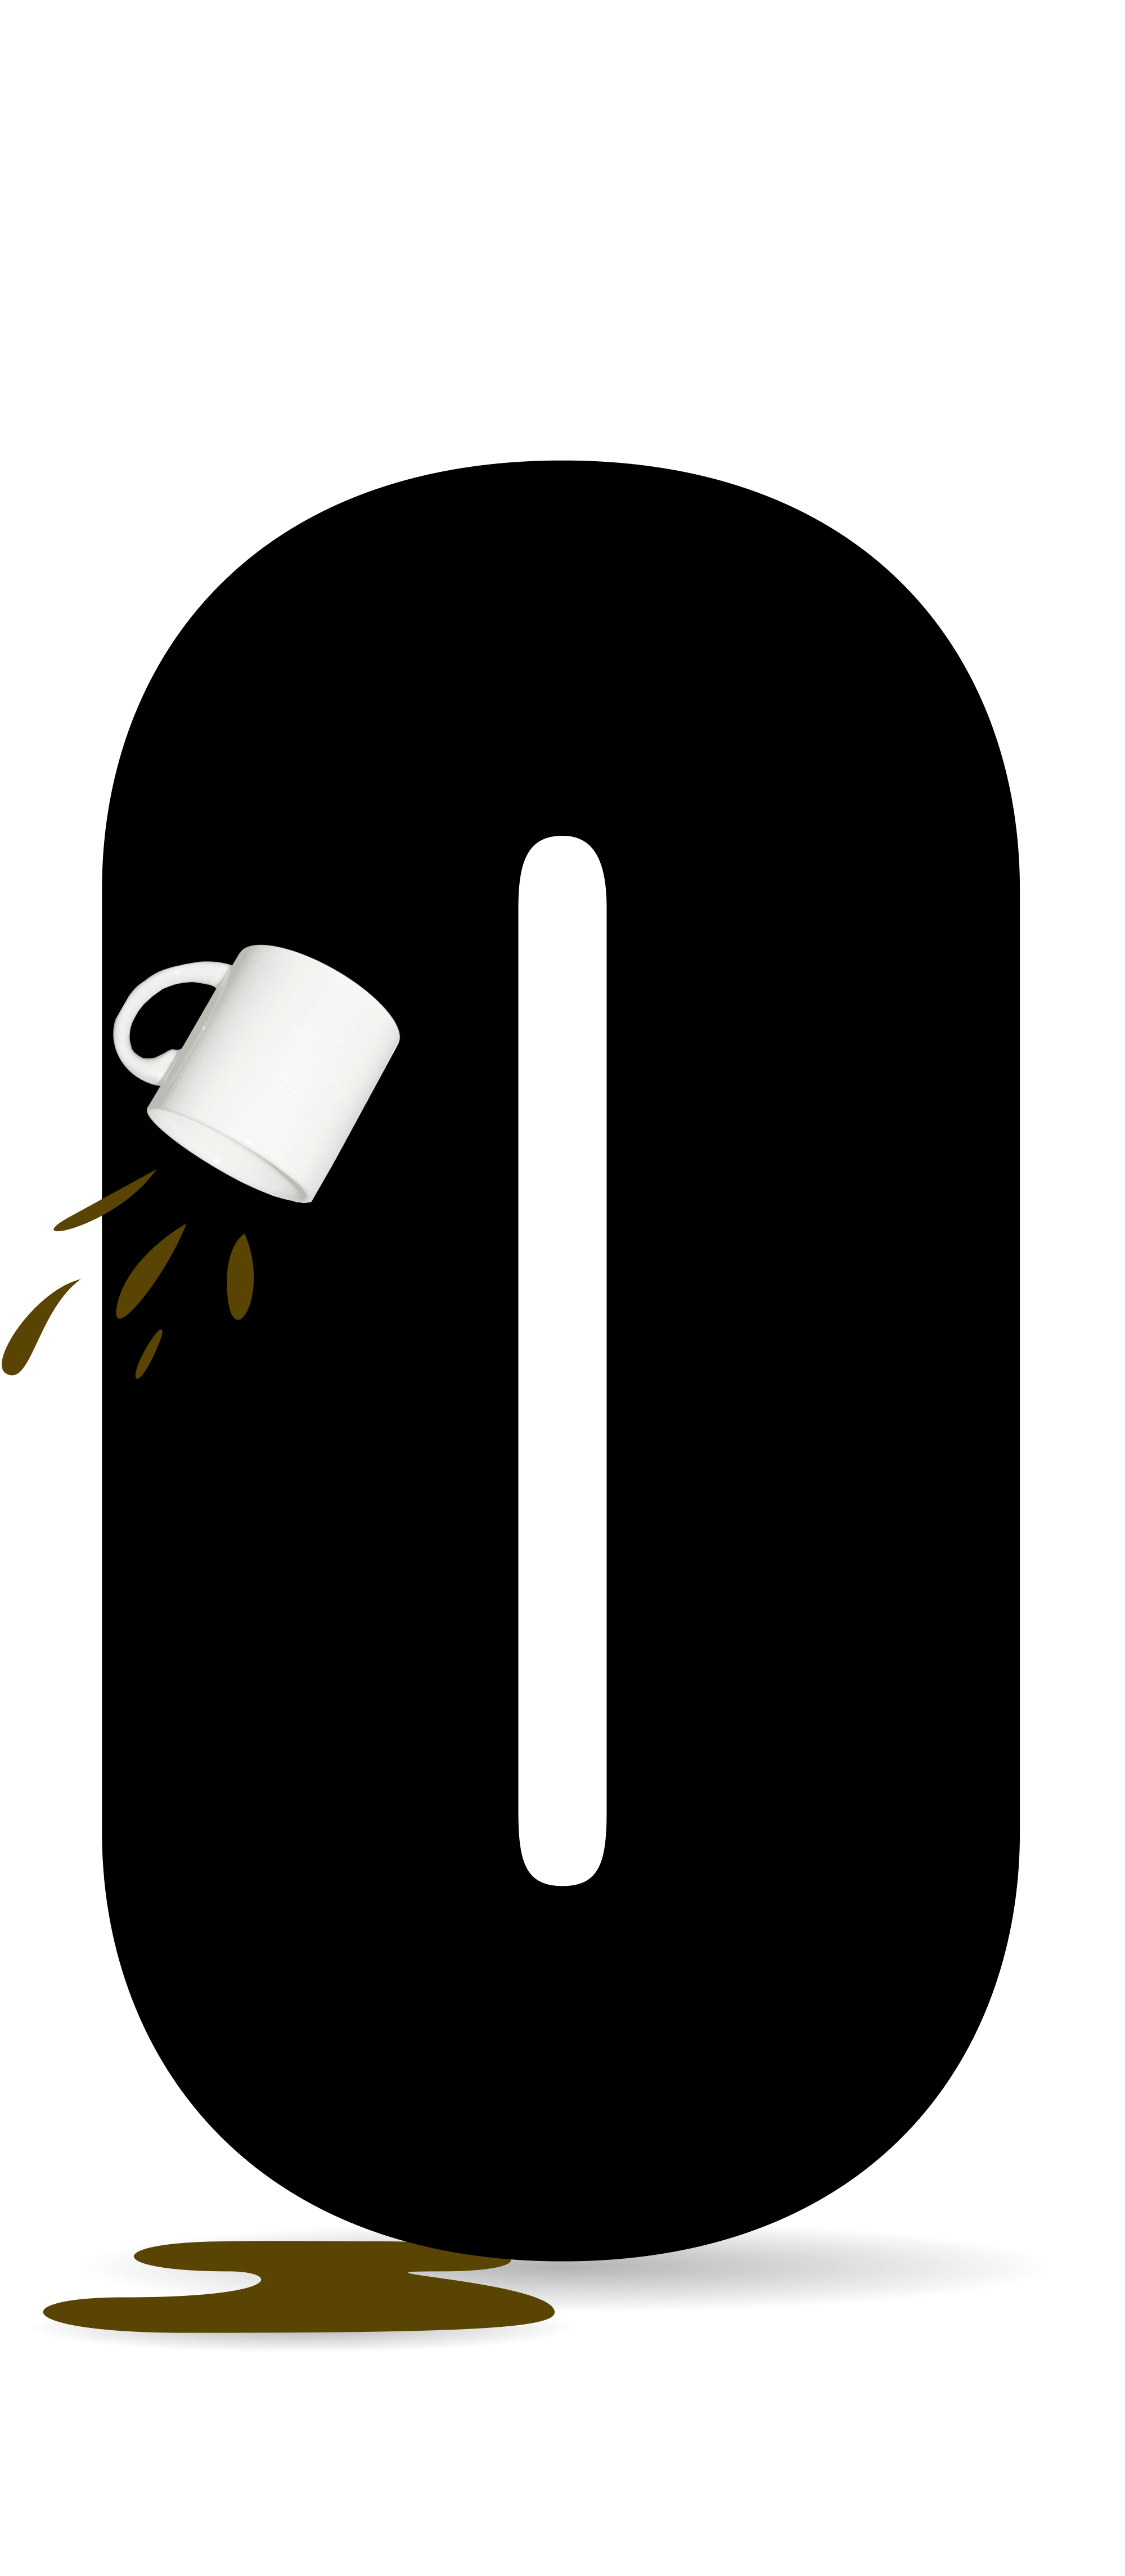 A mug of coffee falls off the O of another sans serif. Yikes!